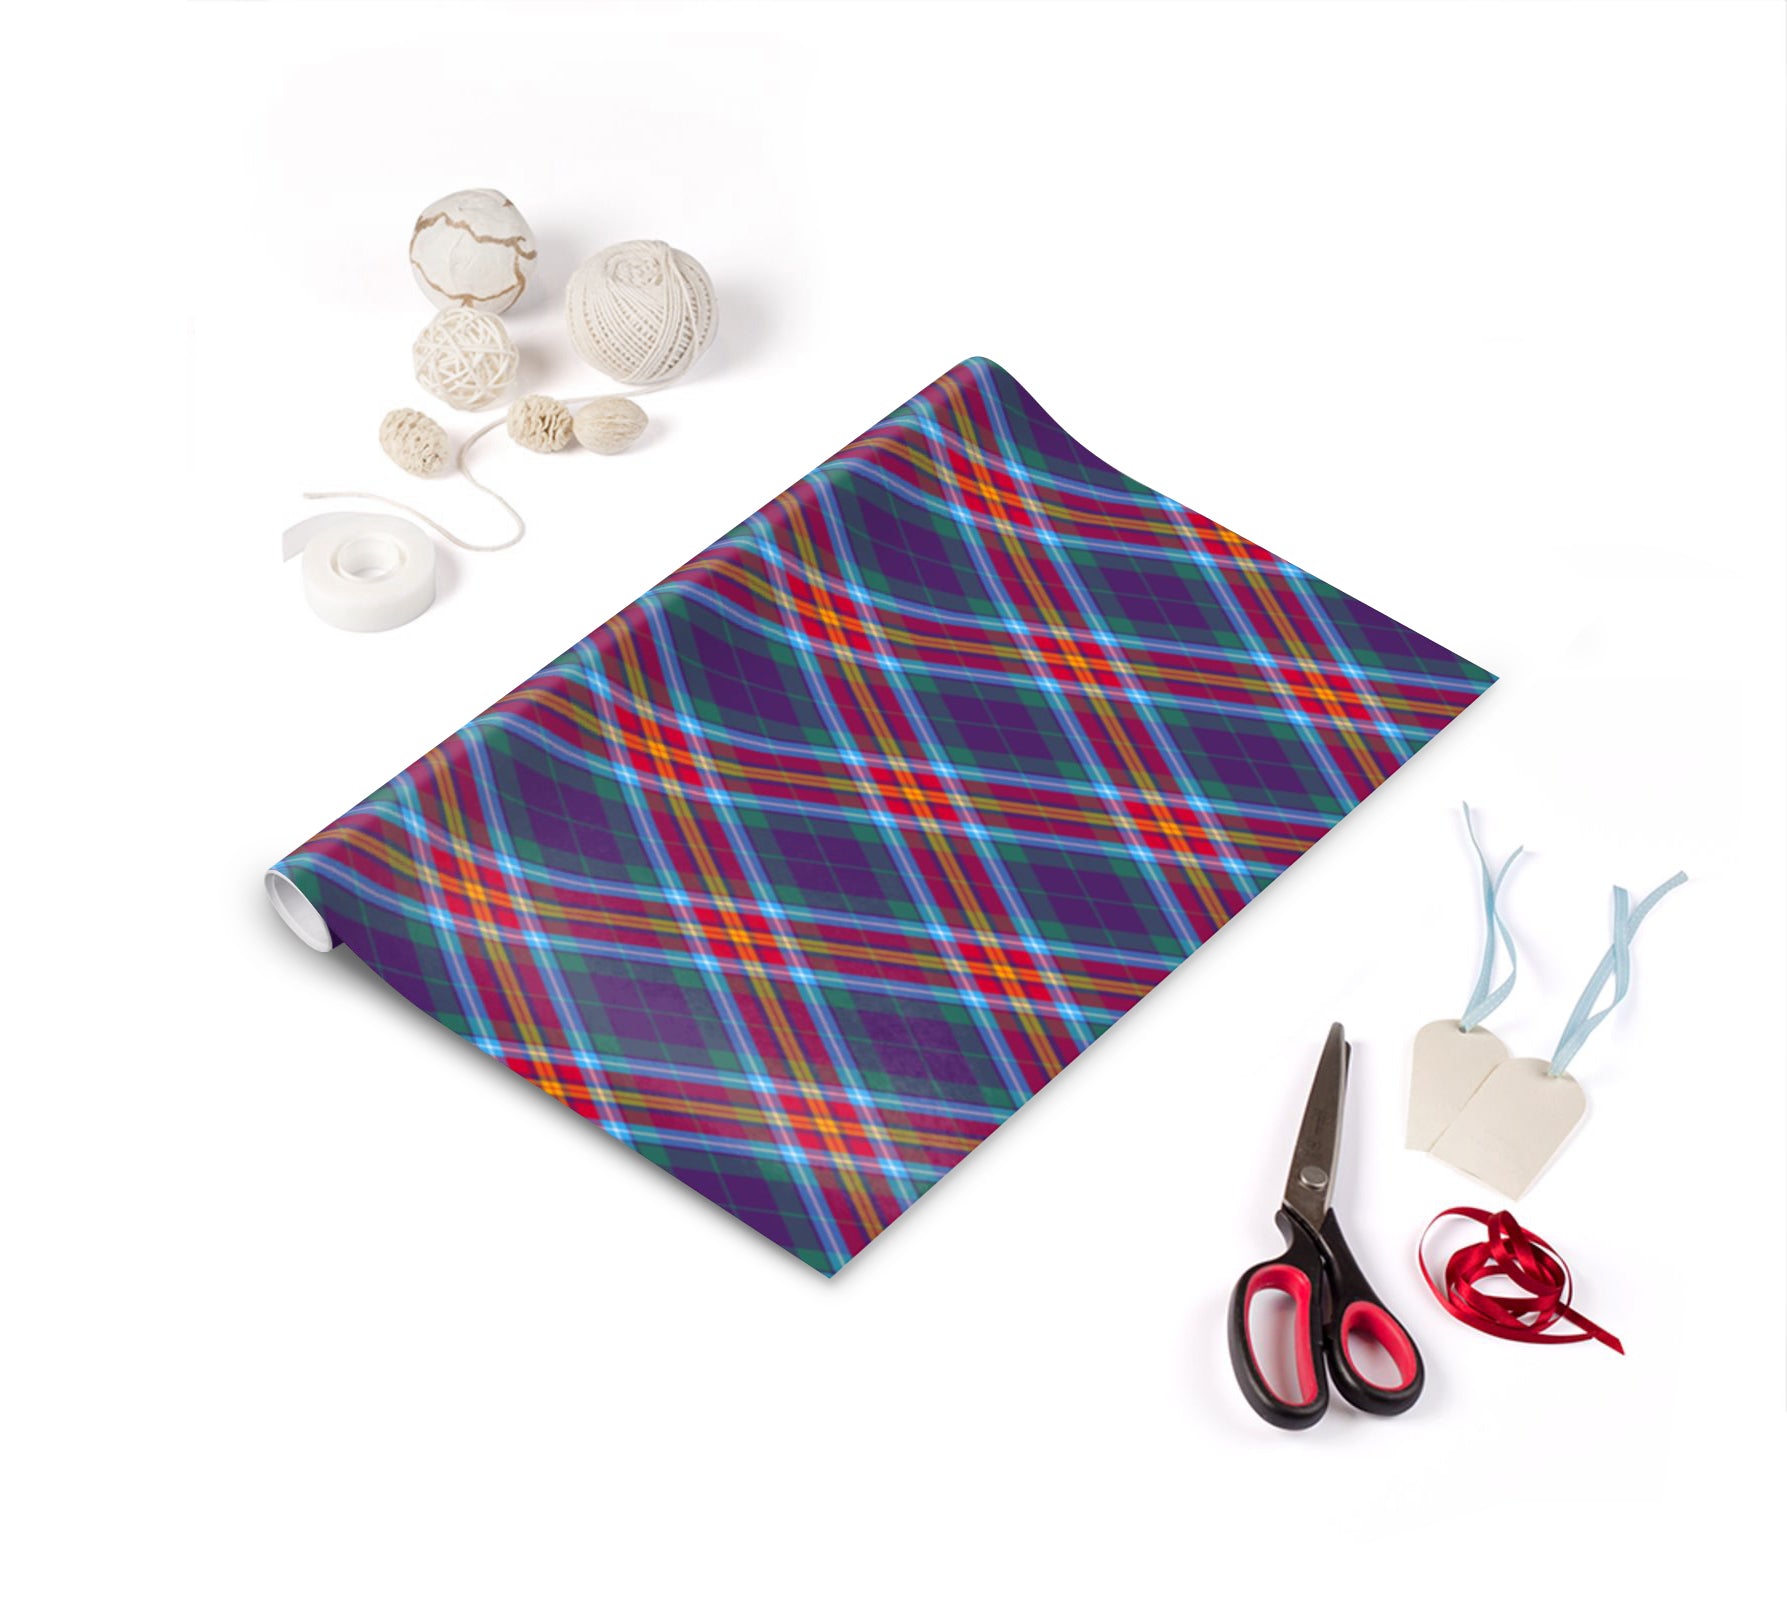 Designer wrapping paper exclusive to the Tartan Artisan ®. Featuring the Alba gu bràth tartan (Scotland Forever), created in 2019 to celebrate a multi-cultural and prosperous Scotland... looking to the future with a sense of openness and optimism